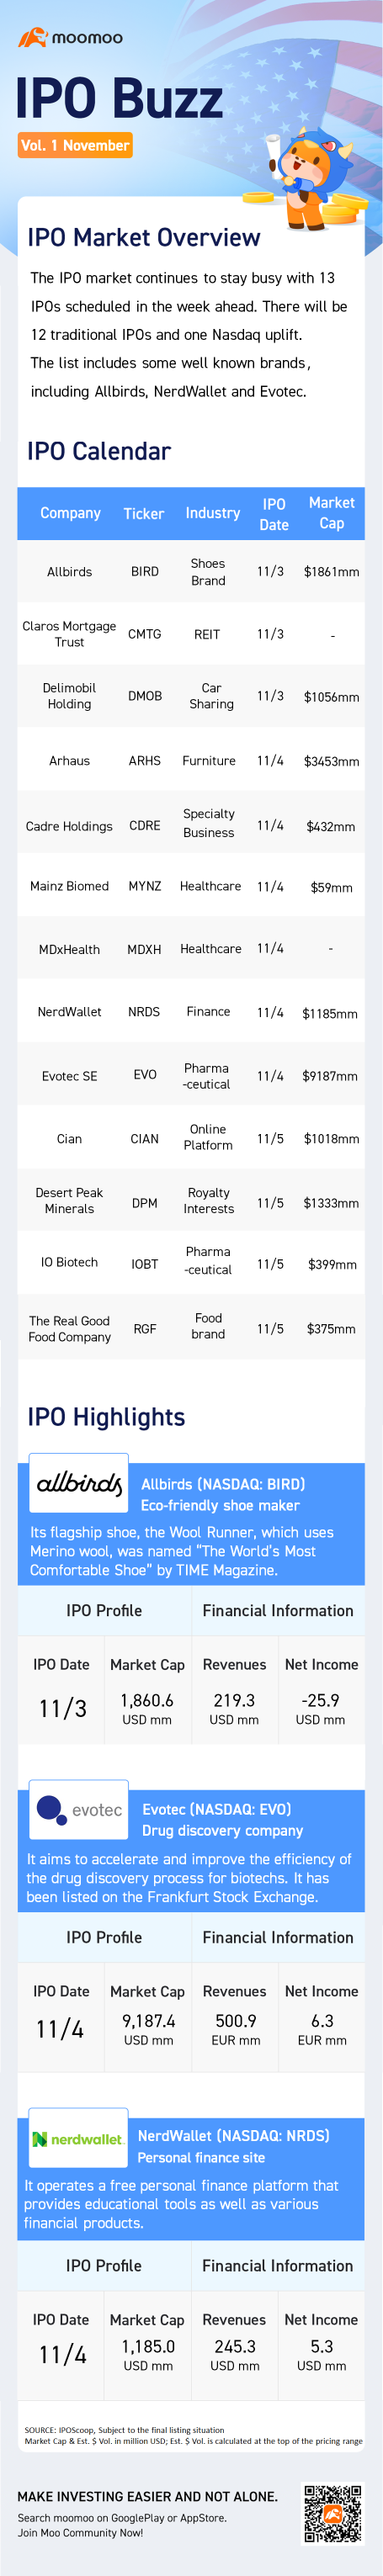 IPO Buzz | Evotec and Allbirds lead a 13-IPO week